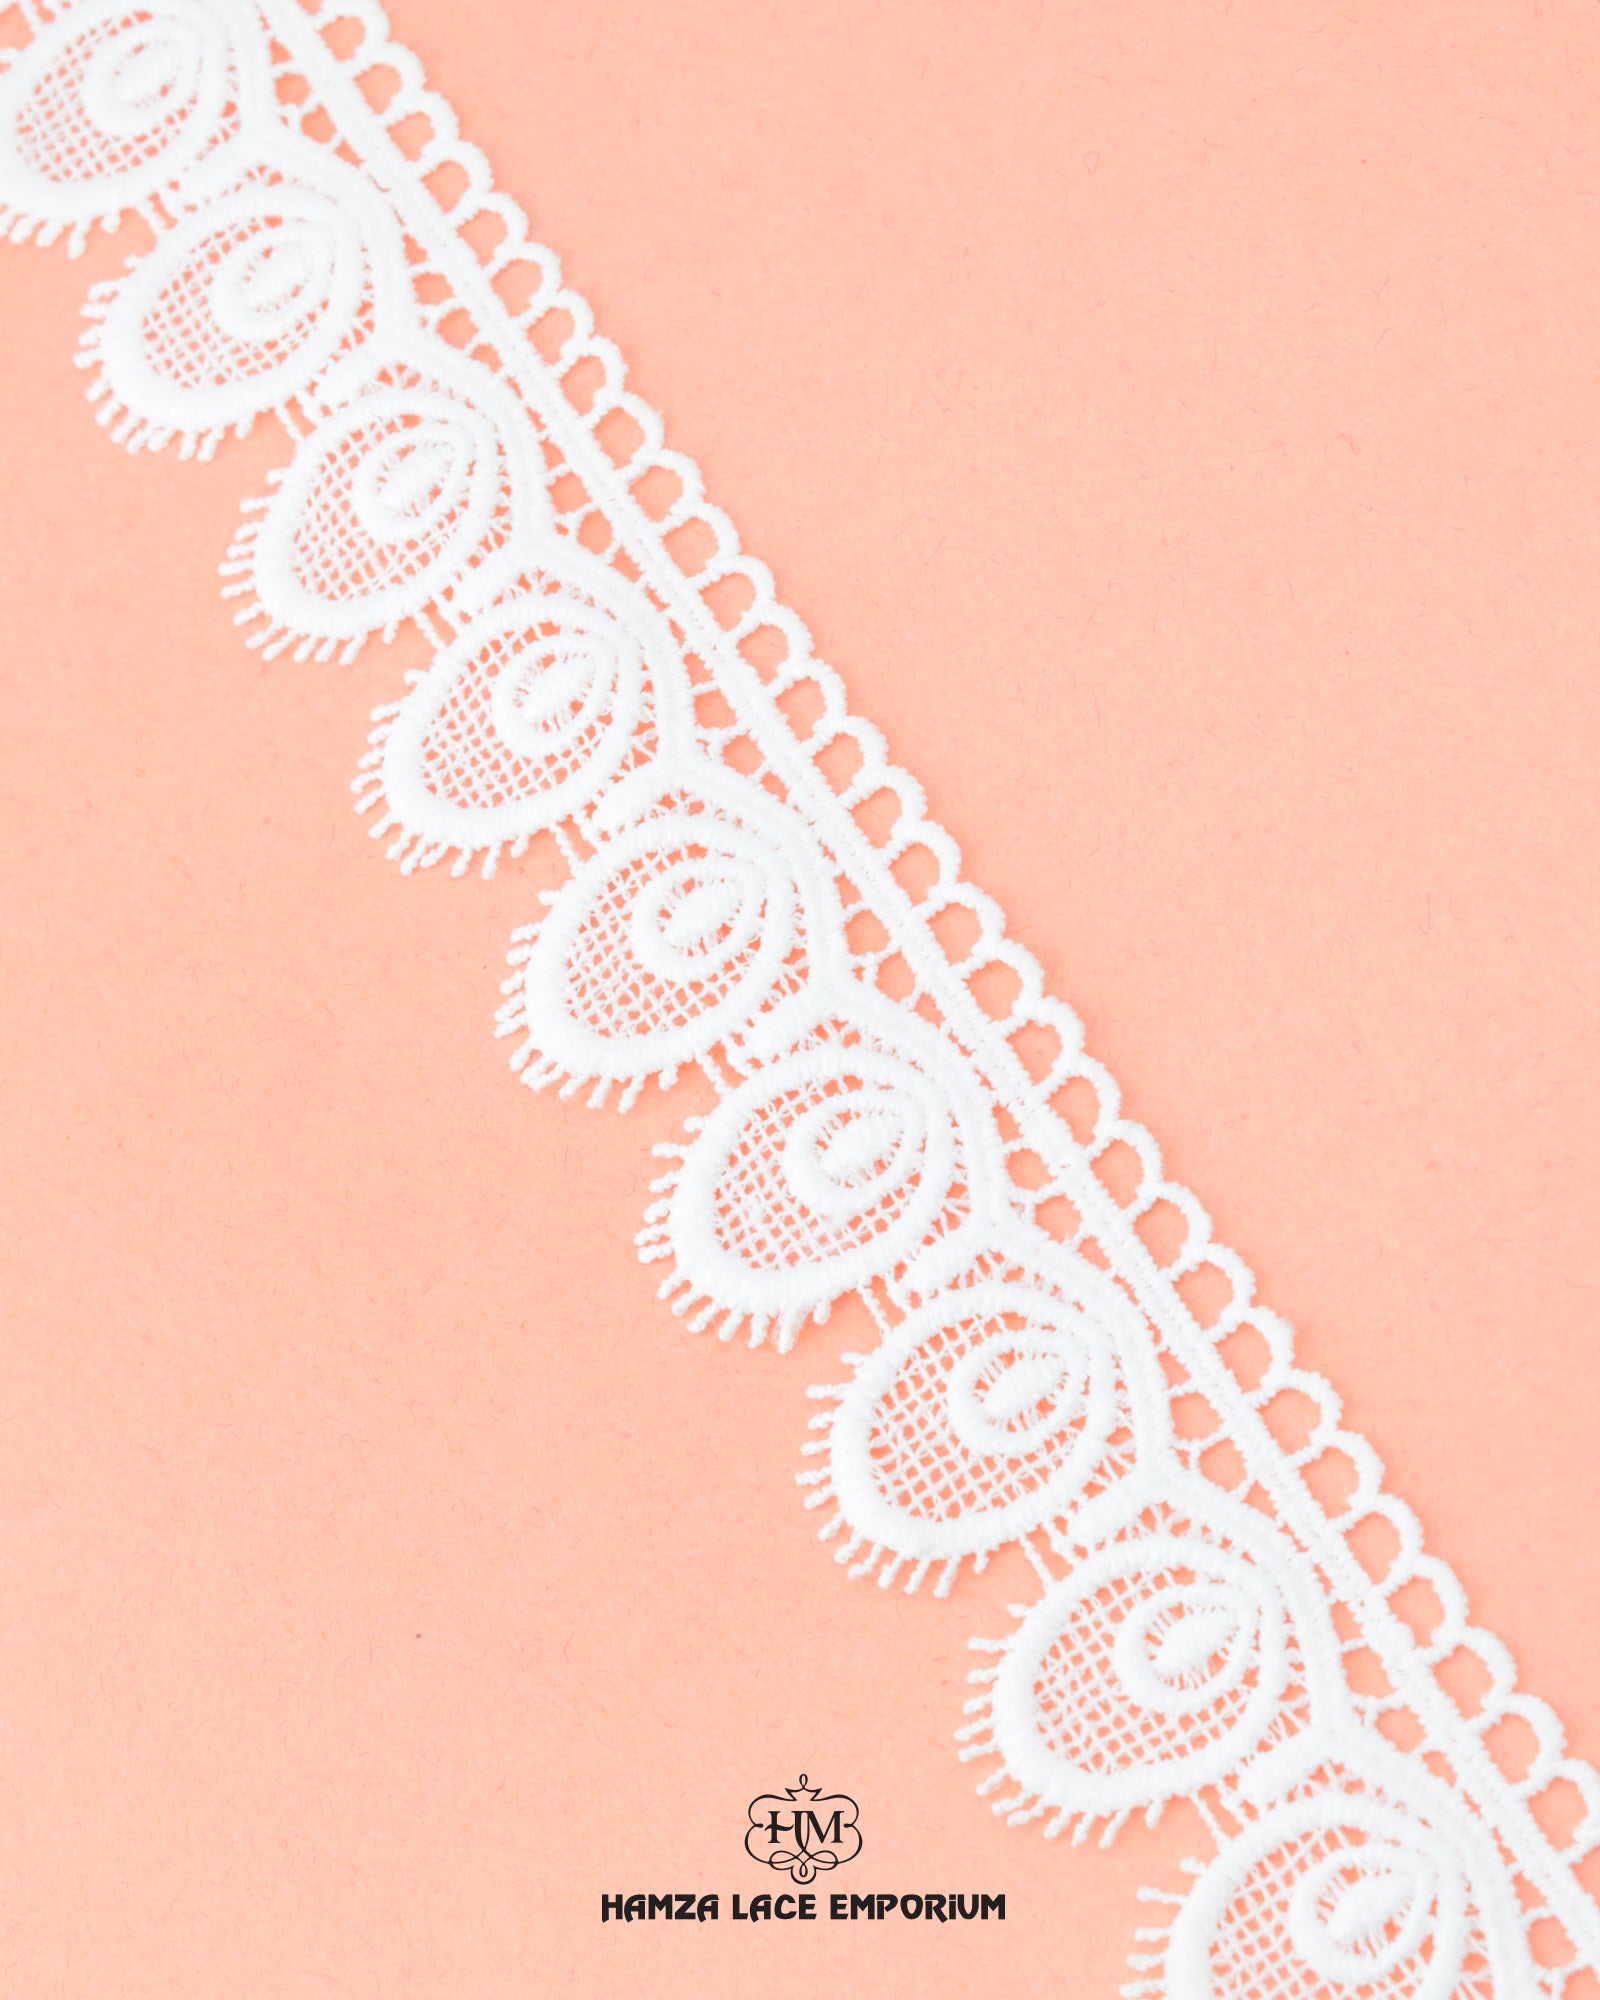 'Edging Loop Lace 23336' with the 'Hamza Lace' sign